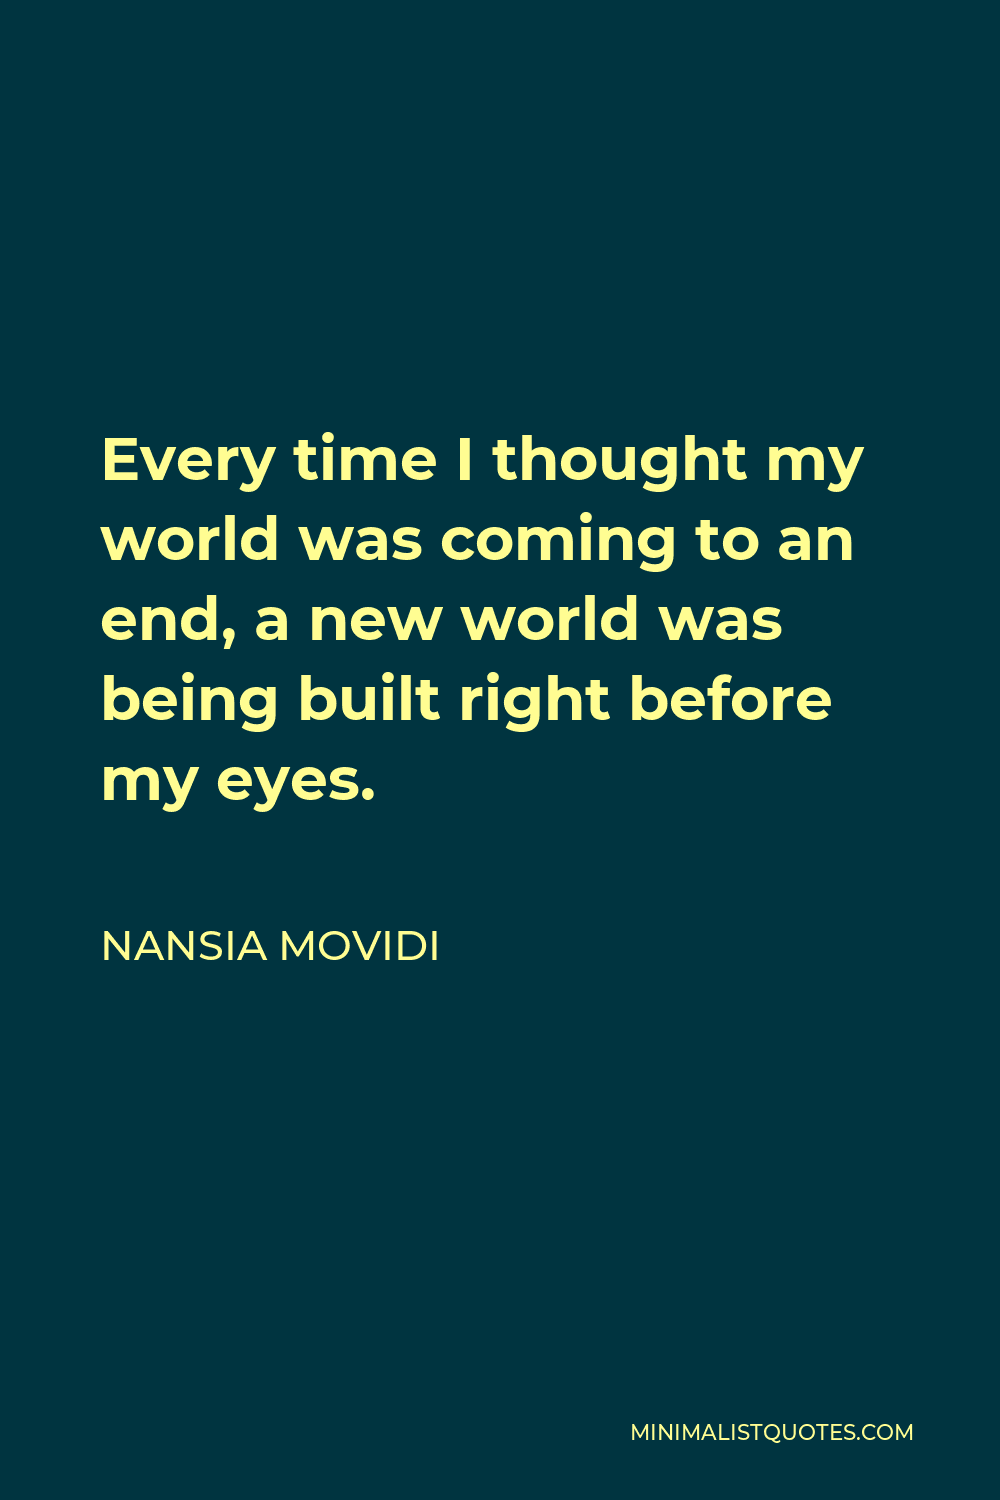 Nansia Movidi Quote - Every time I thought my world was coming to an end, a new world was being built right before my eyes.